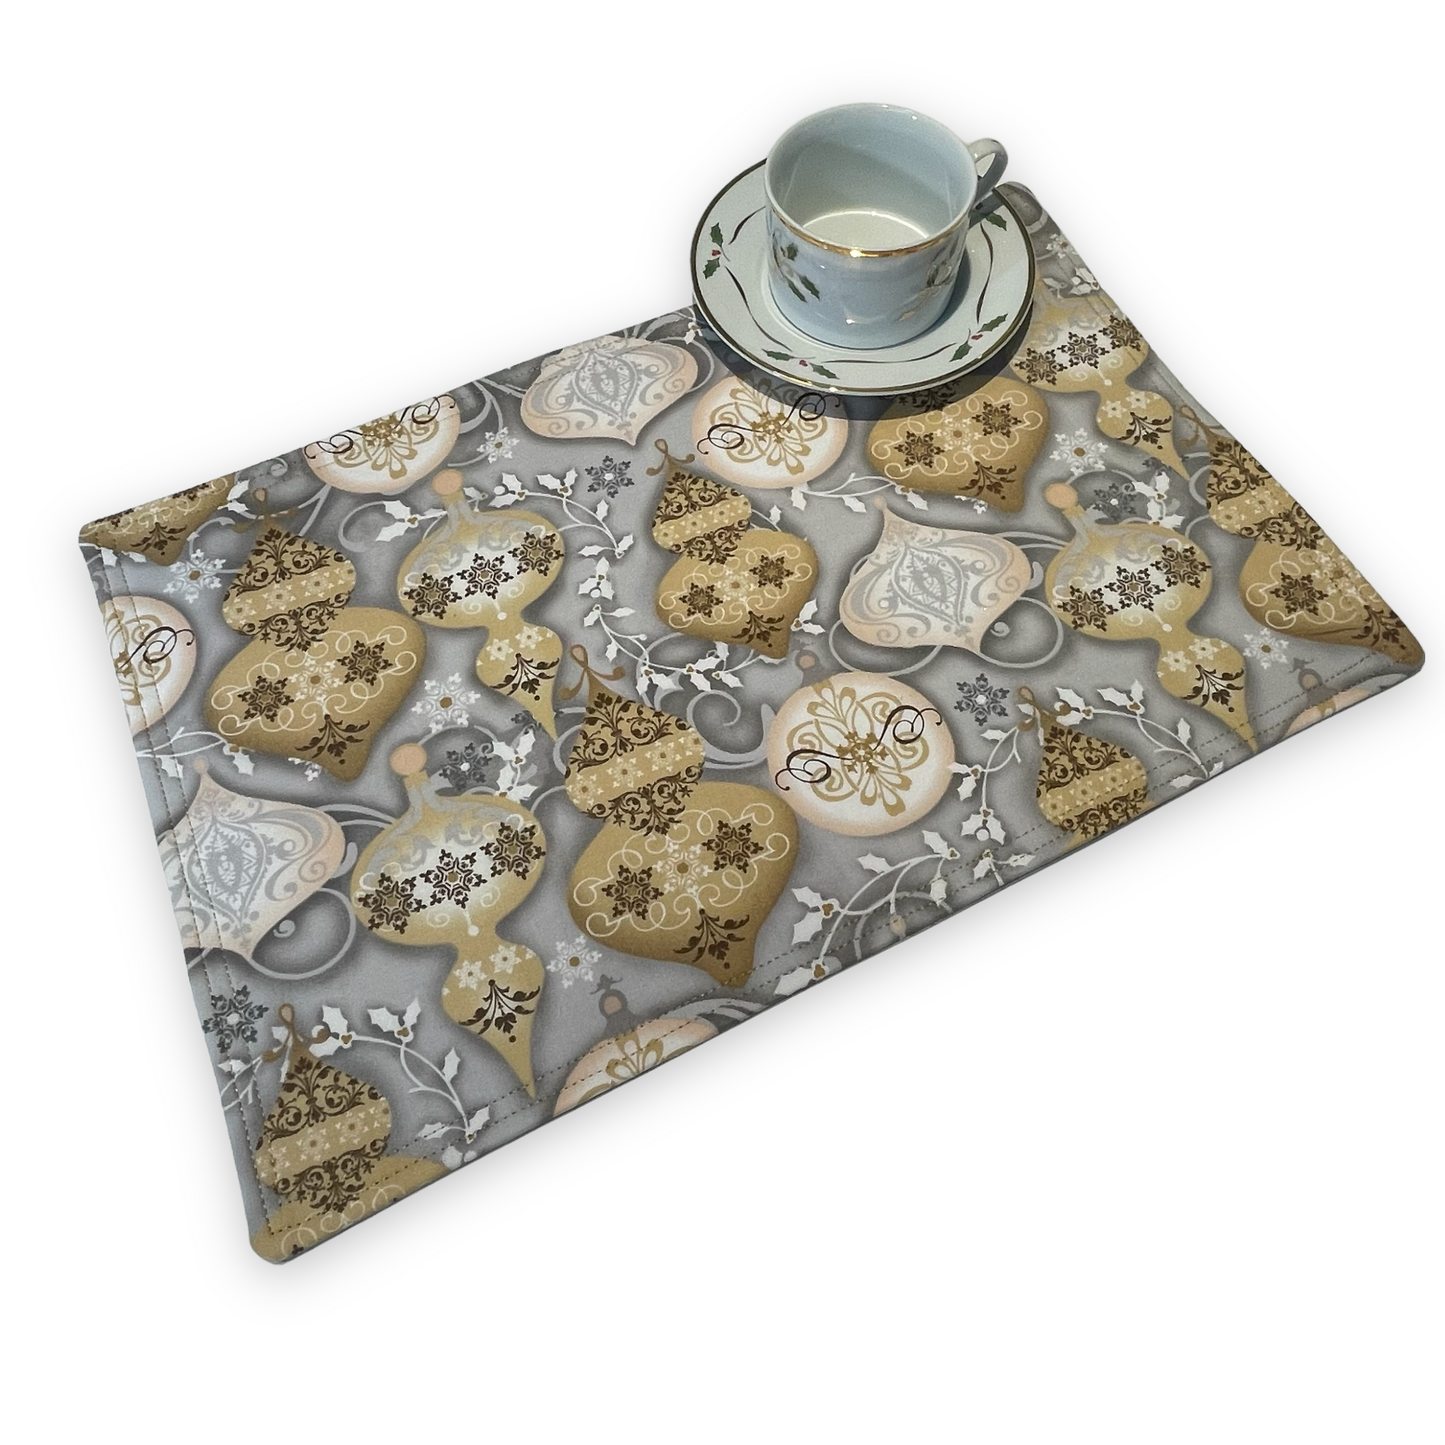 Set of two Christmas Placemats, handmade in Canada Featuring Gold and Cream Christmas Ornaments on one side and Silver Snowflakes on the reverse. Easily dress up your Christmas Kitchen Table with these stylish luxury placemats. Check out all the mix and match decor at Home Stitchery Decor